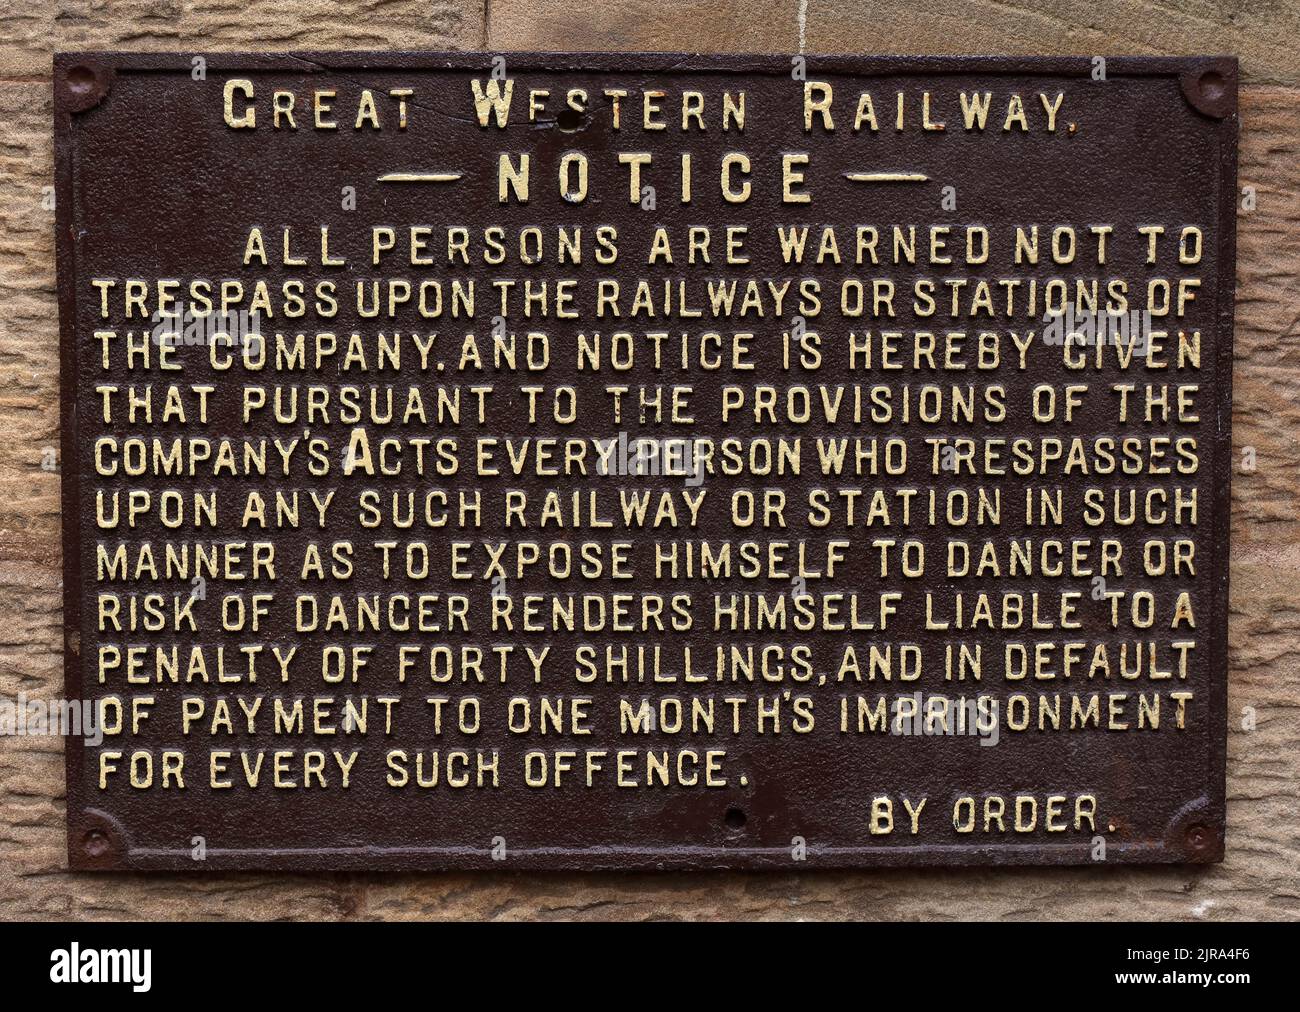 Cast iron GWR - Great Western Railway Notice - By order - No trespassing upon the railway, penalty of forty shillings Stock Photo